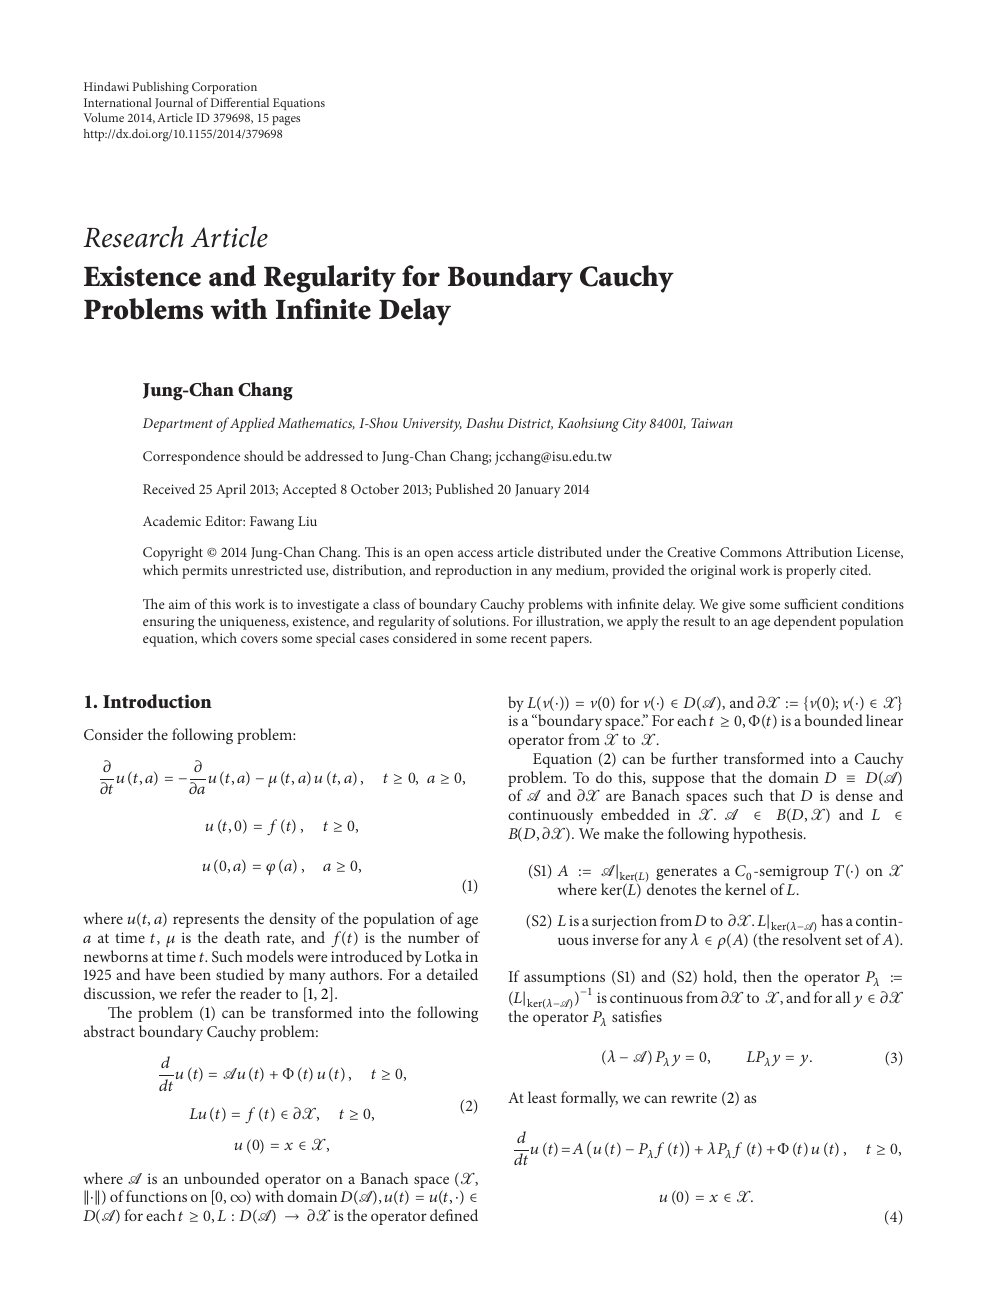 Existence And Regularity For Boundary Cauchy Problems With Infinite Delay Topic Of Research Paper In Mathematics Download Scholarly Article Pdf And Read For Free On Cyberleninka Open Science Hub